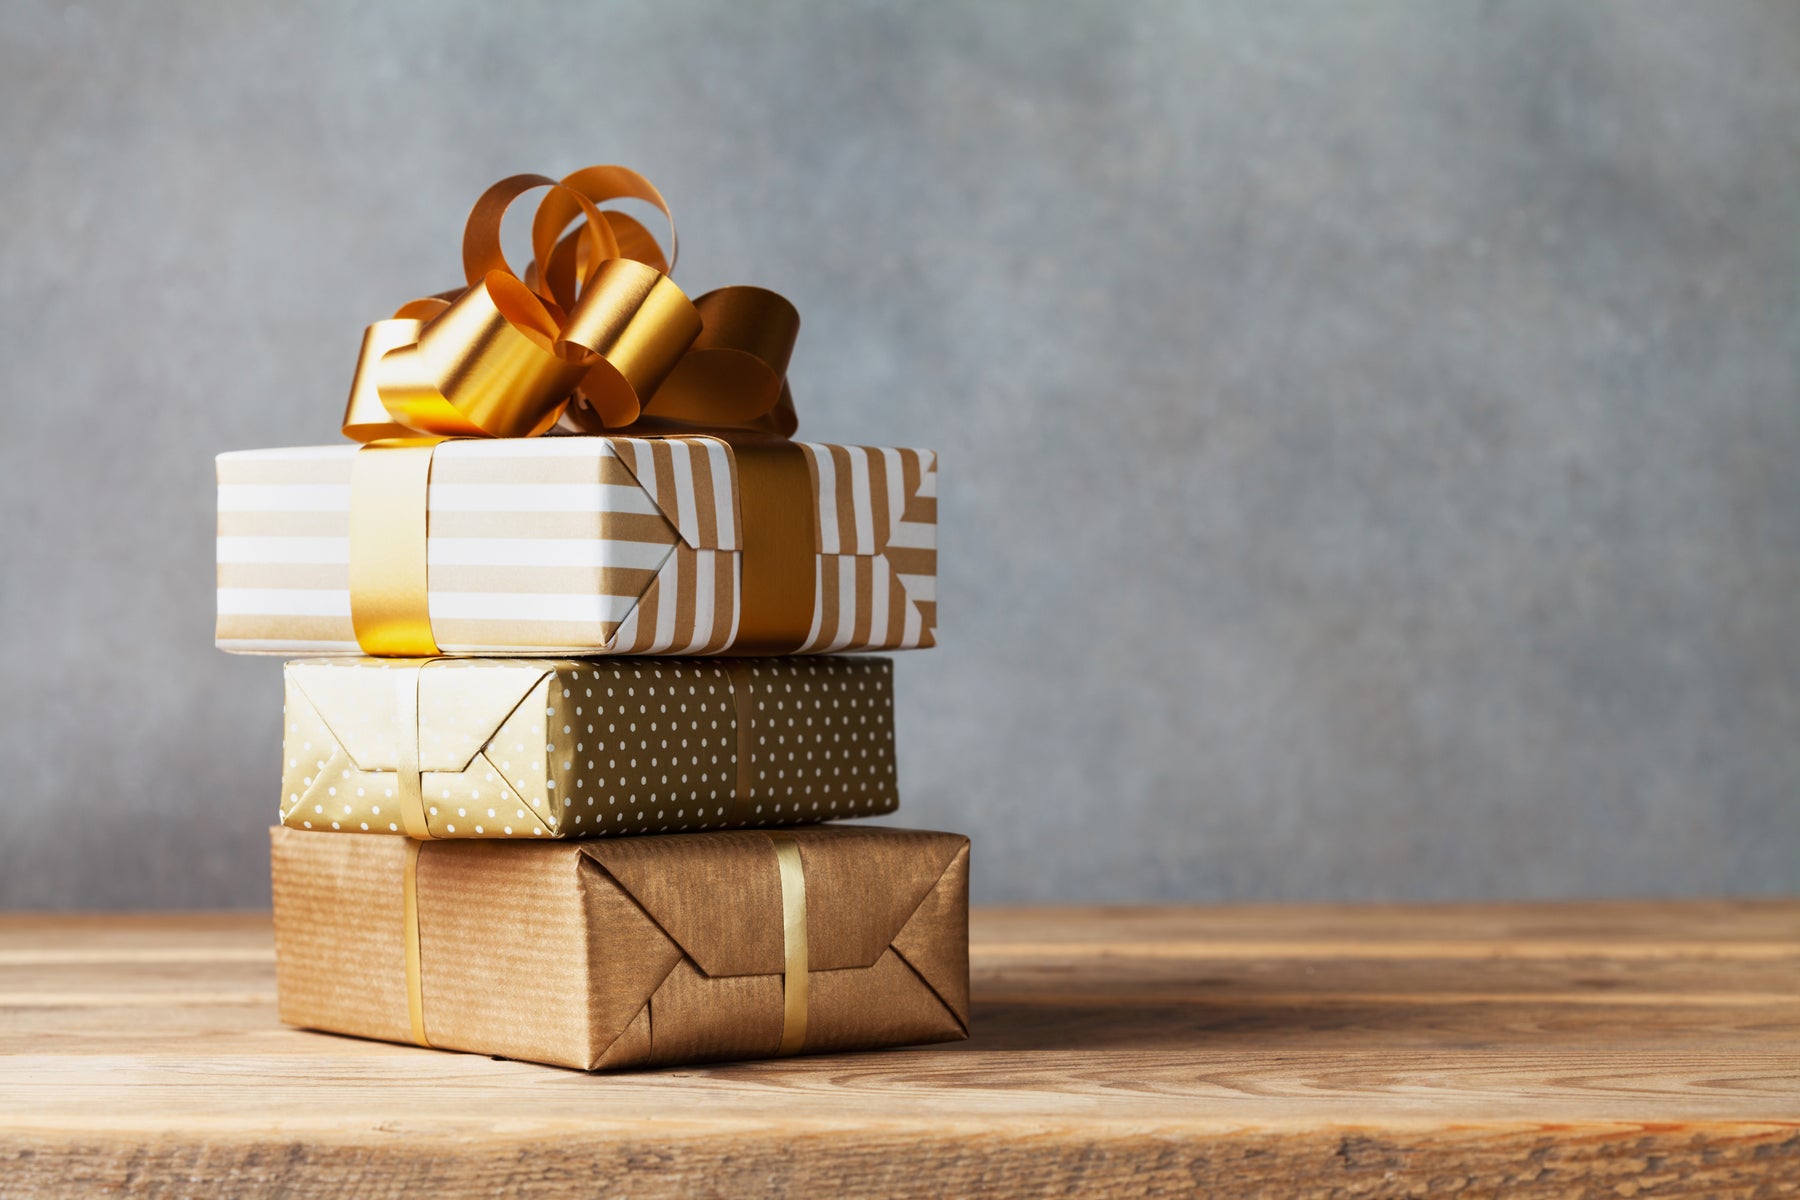 Giving Clients Holiday Gifts that Stand Out